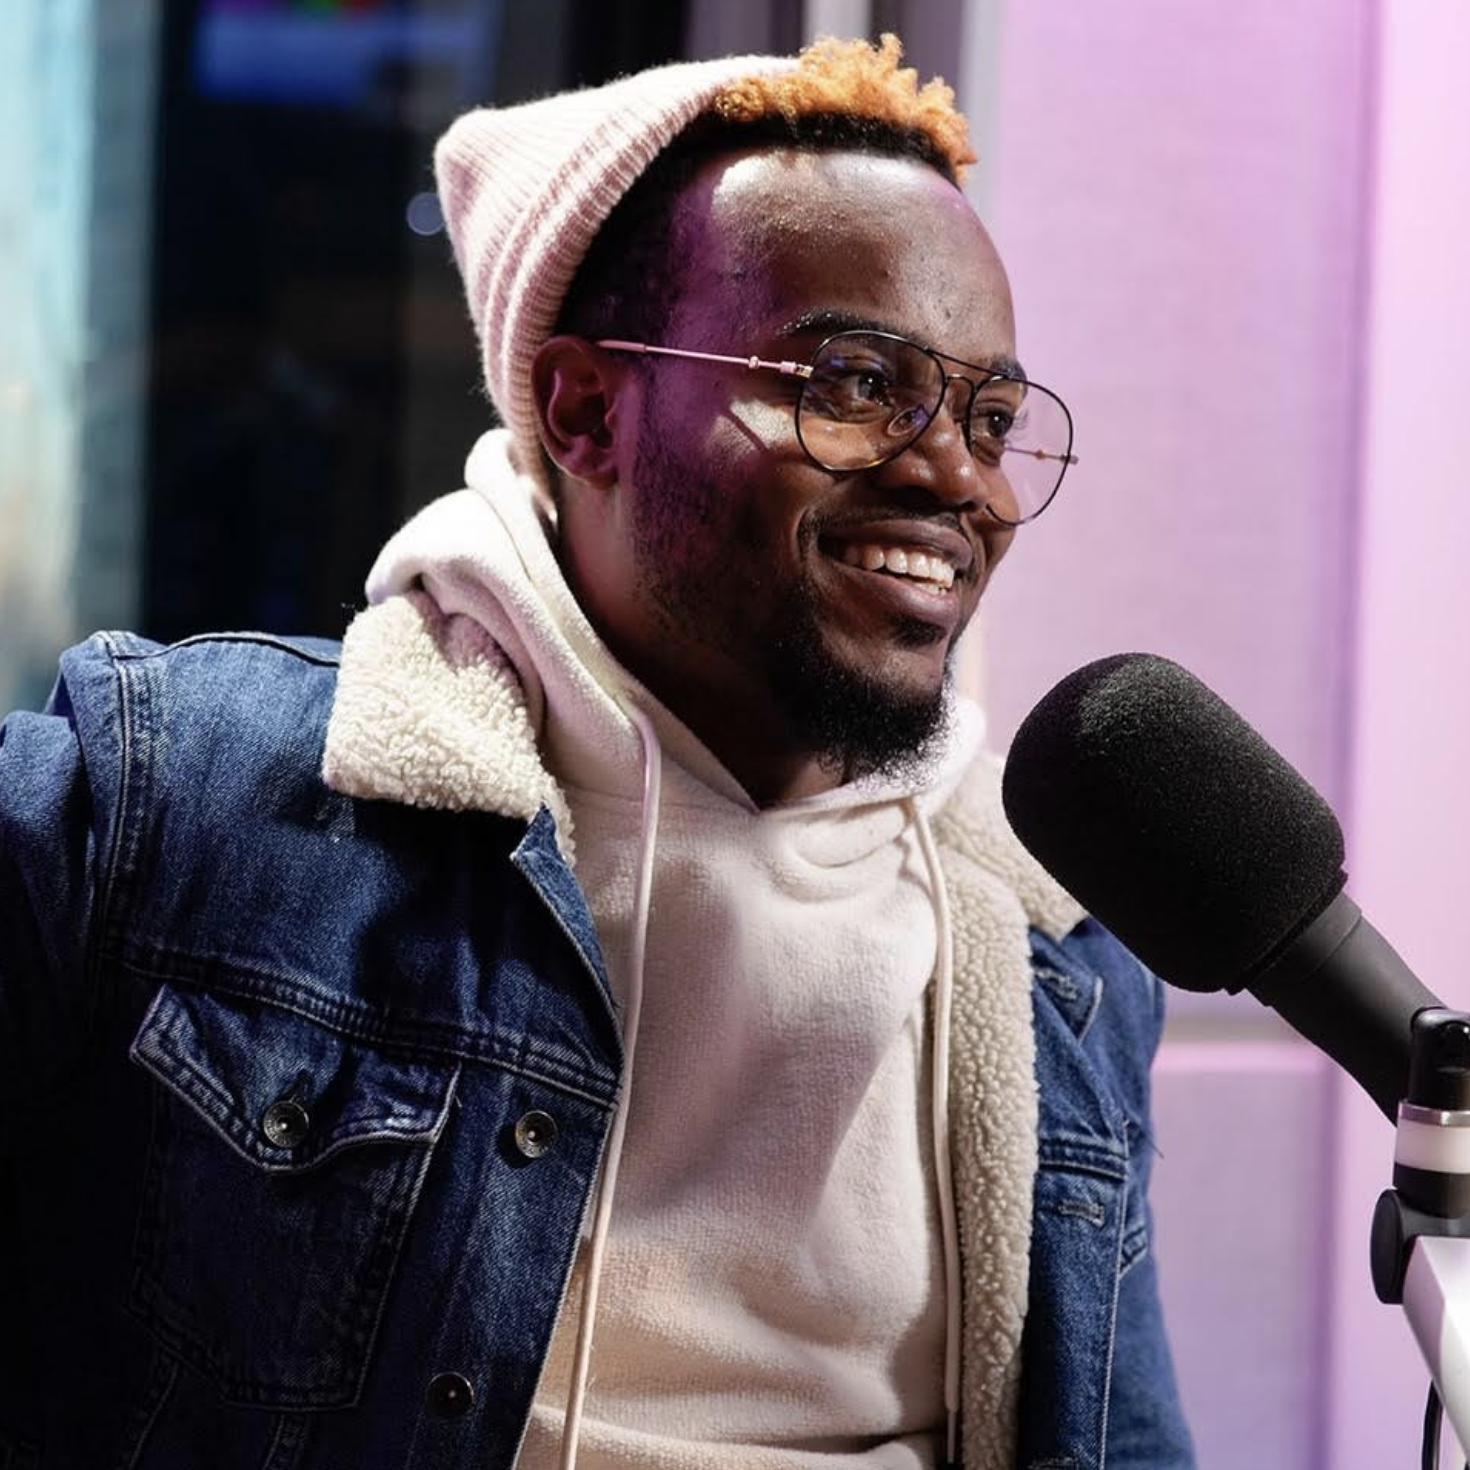 Catch four-time Grammy nominee Travis Greene, on Beats 1! Available now